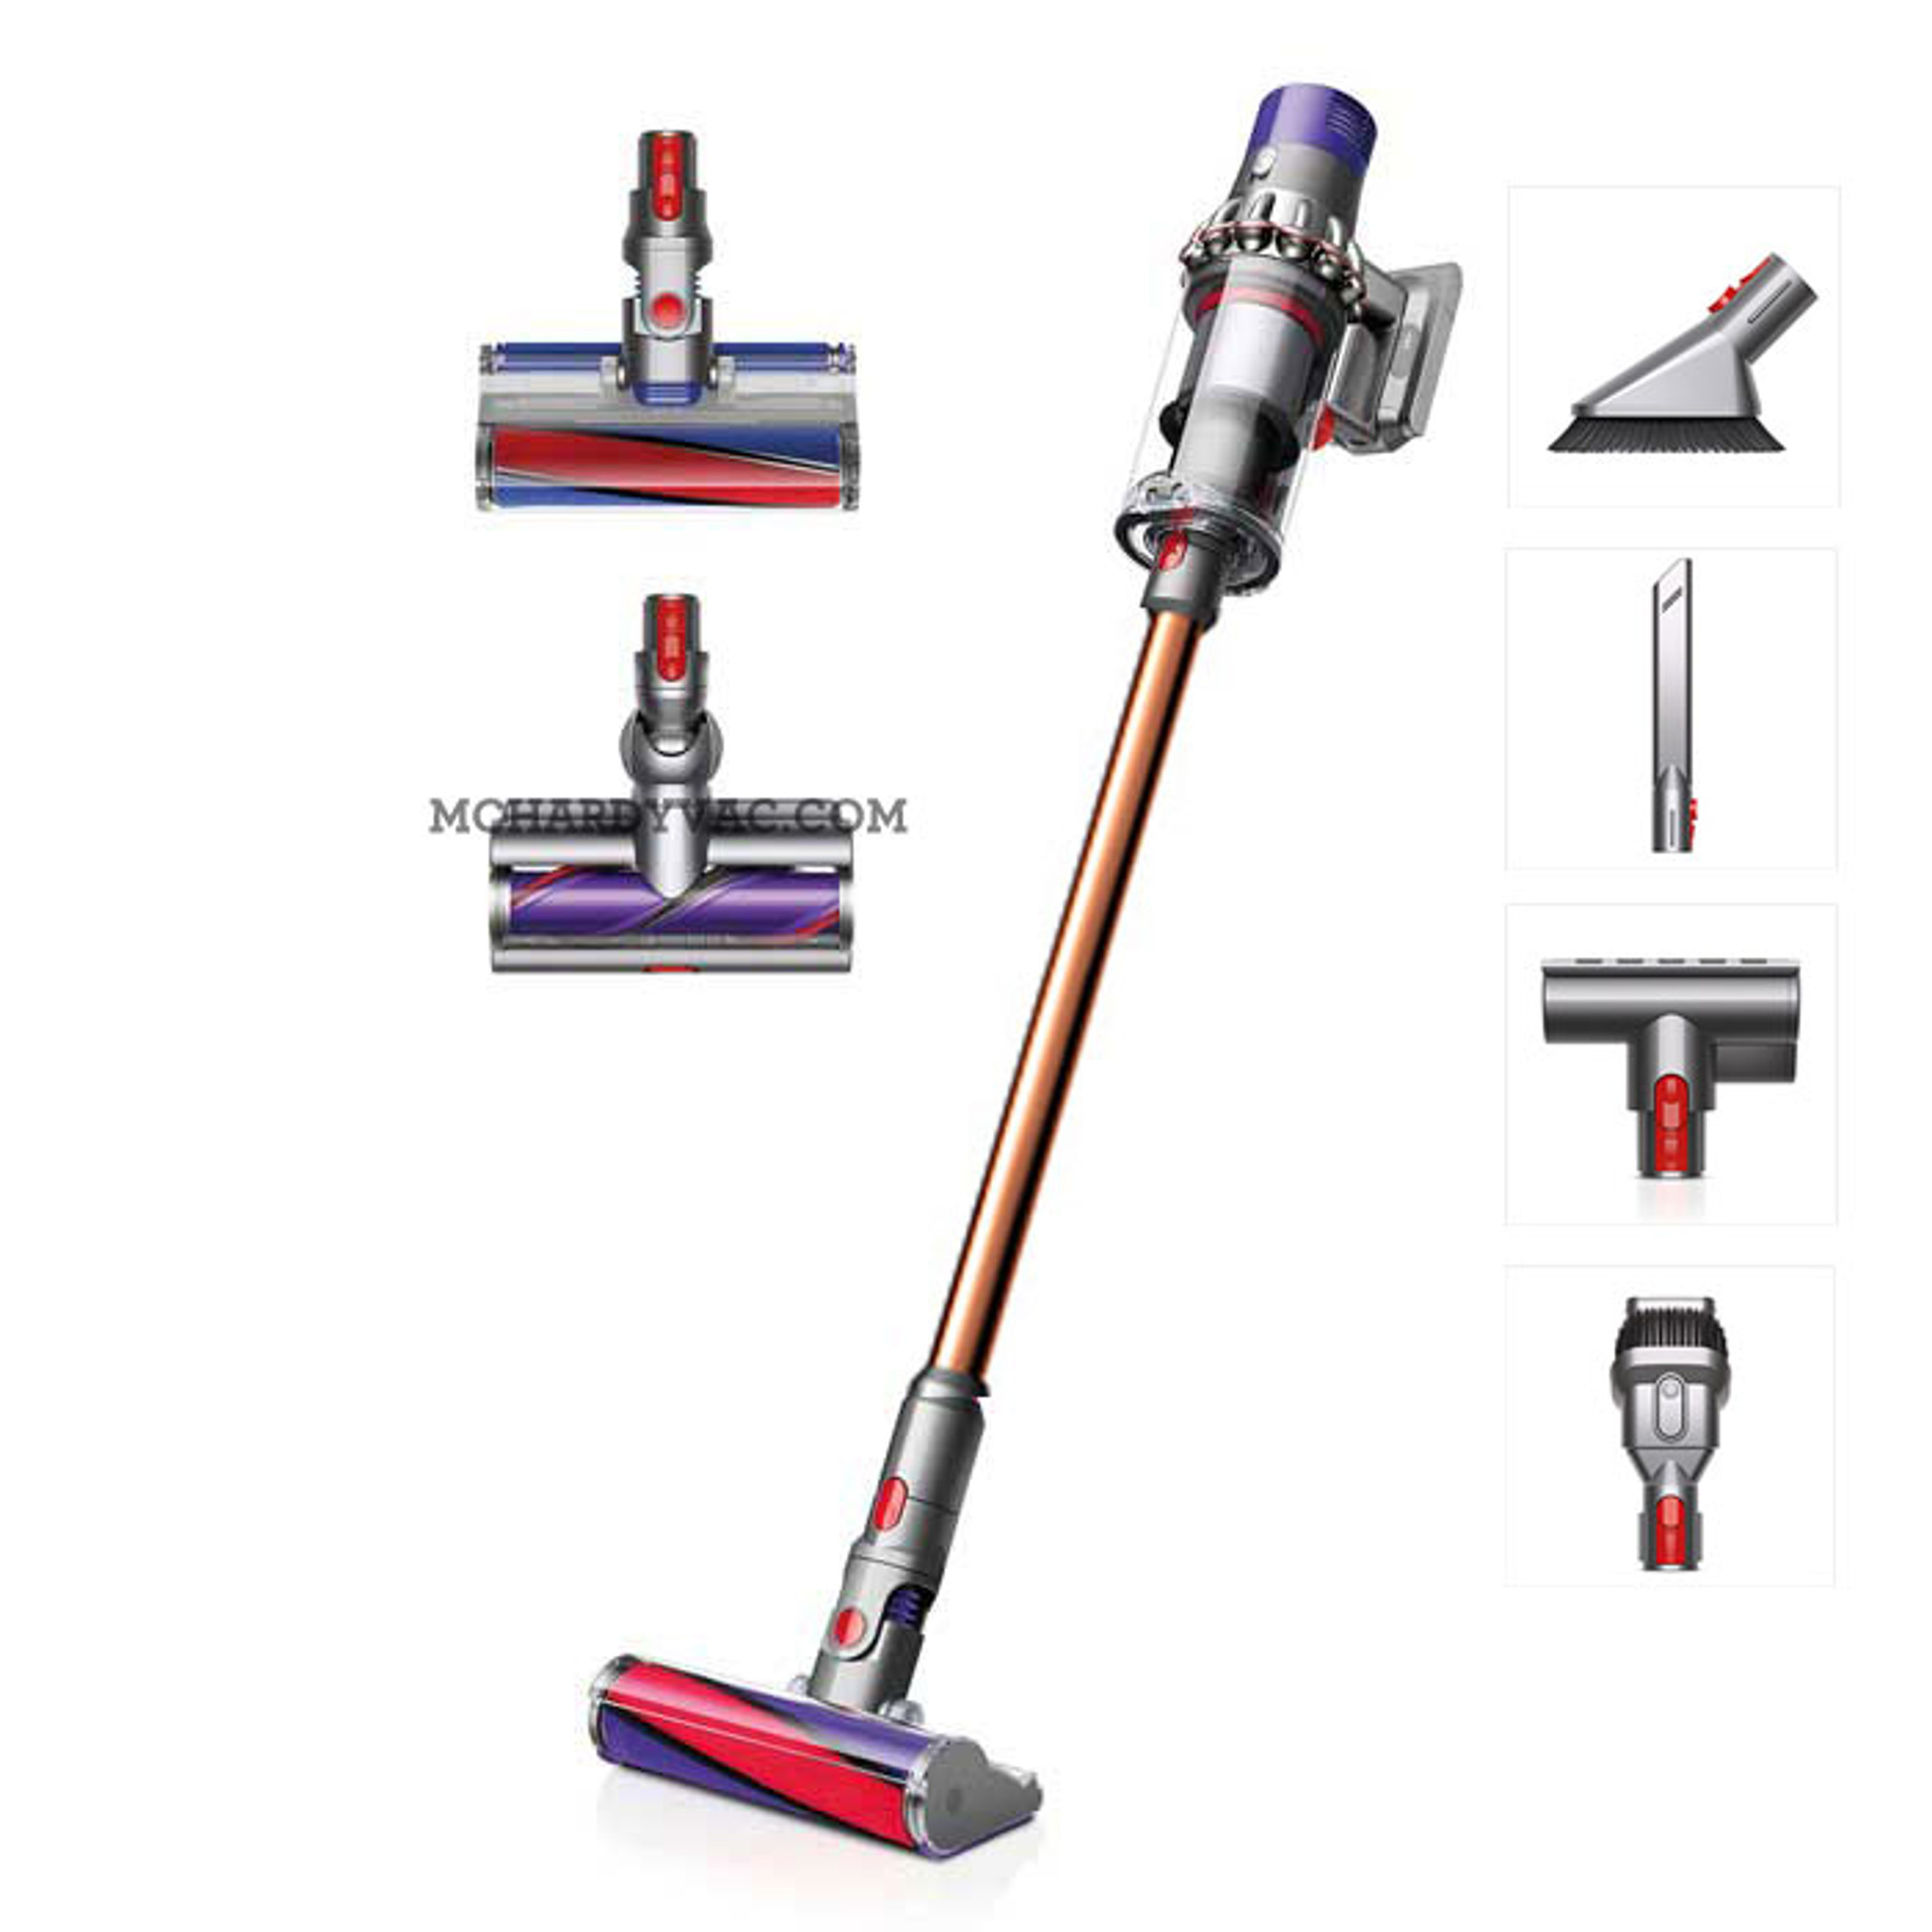 Buy Dyson Cyclone V10 Absolute Cordless Vacuum from Canada at